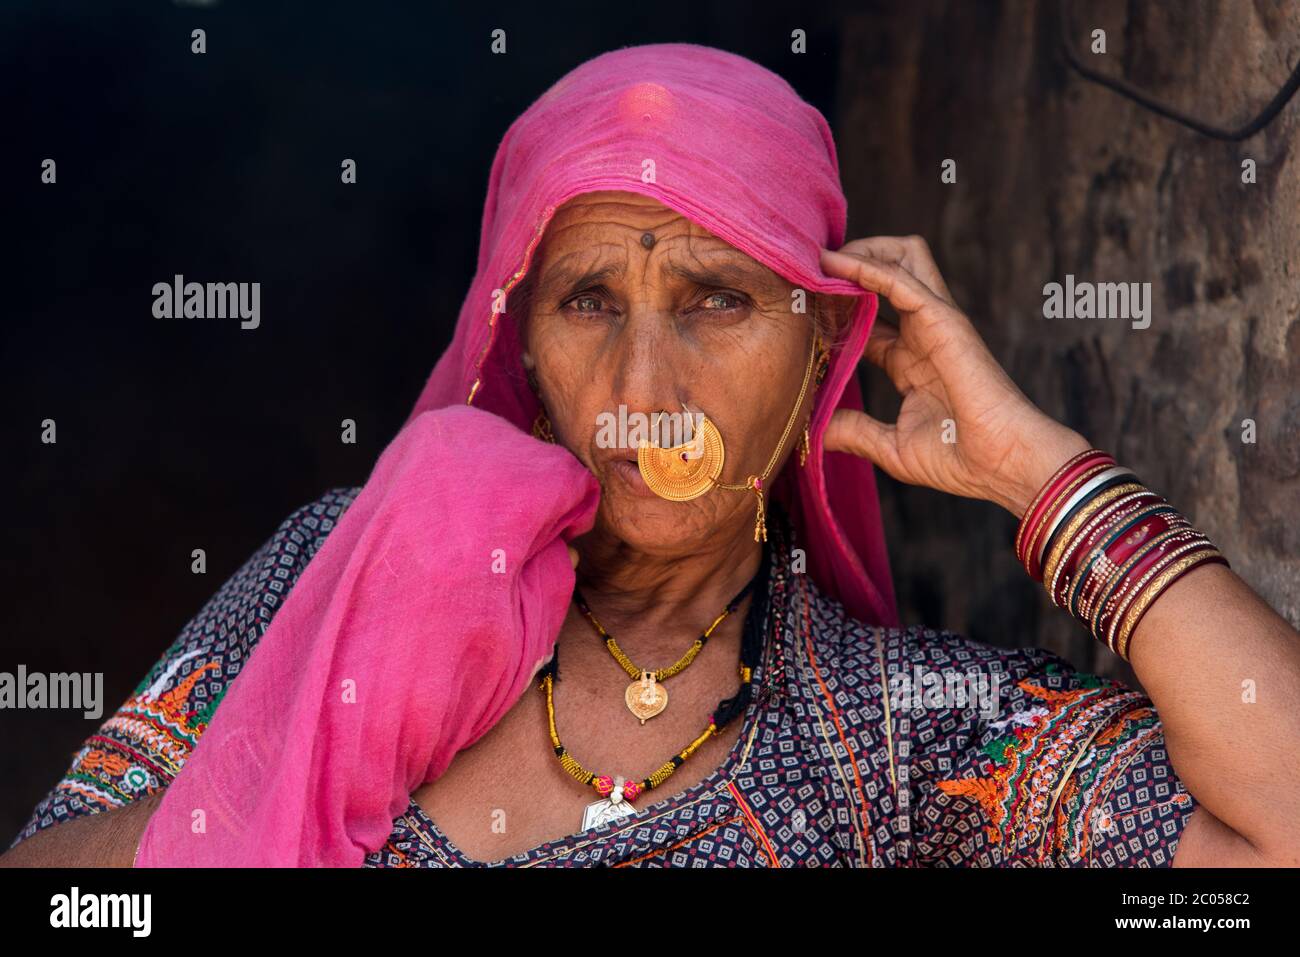 An Indian woman traditionally dressed at her home in a village in Rajasthan, India. Stock Photo